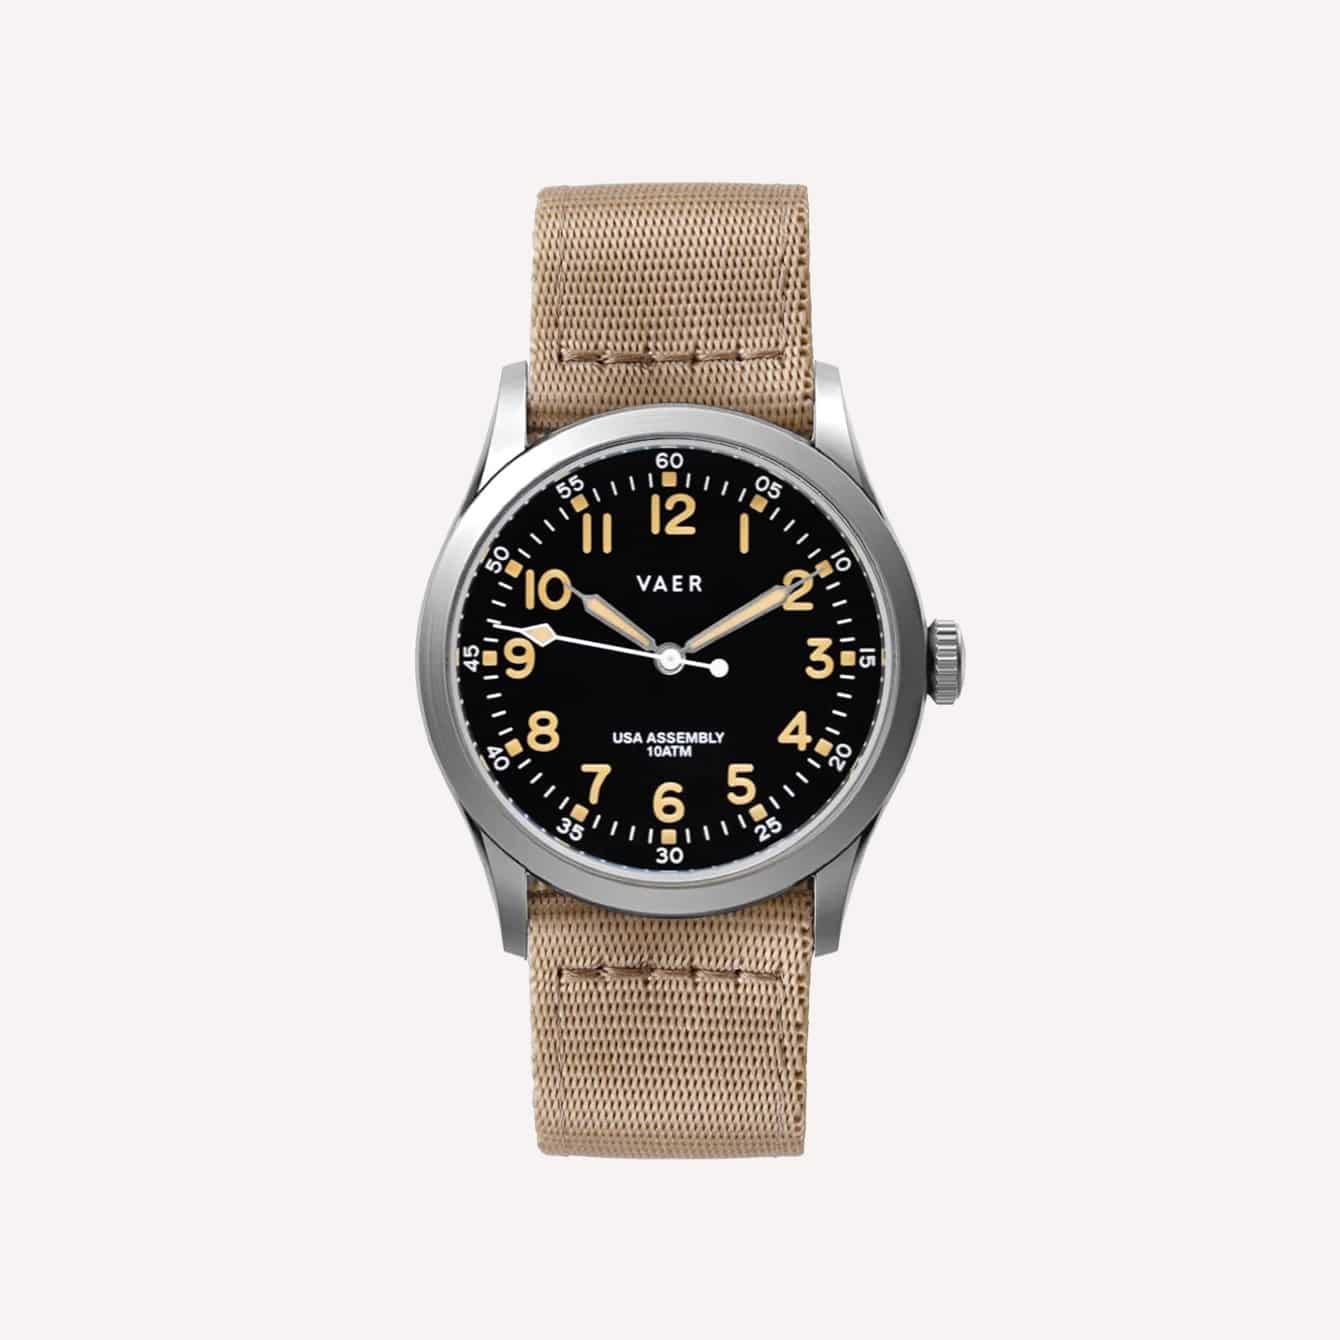 15 Best Military Watches-7